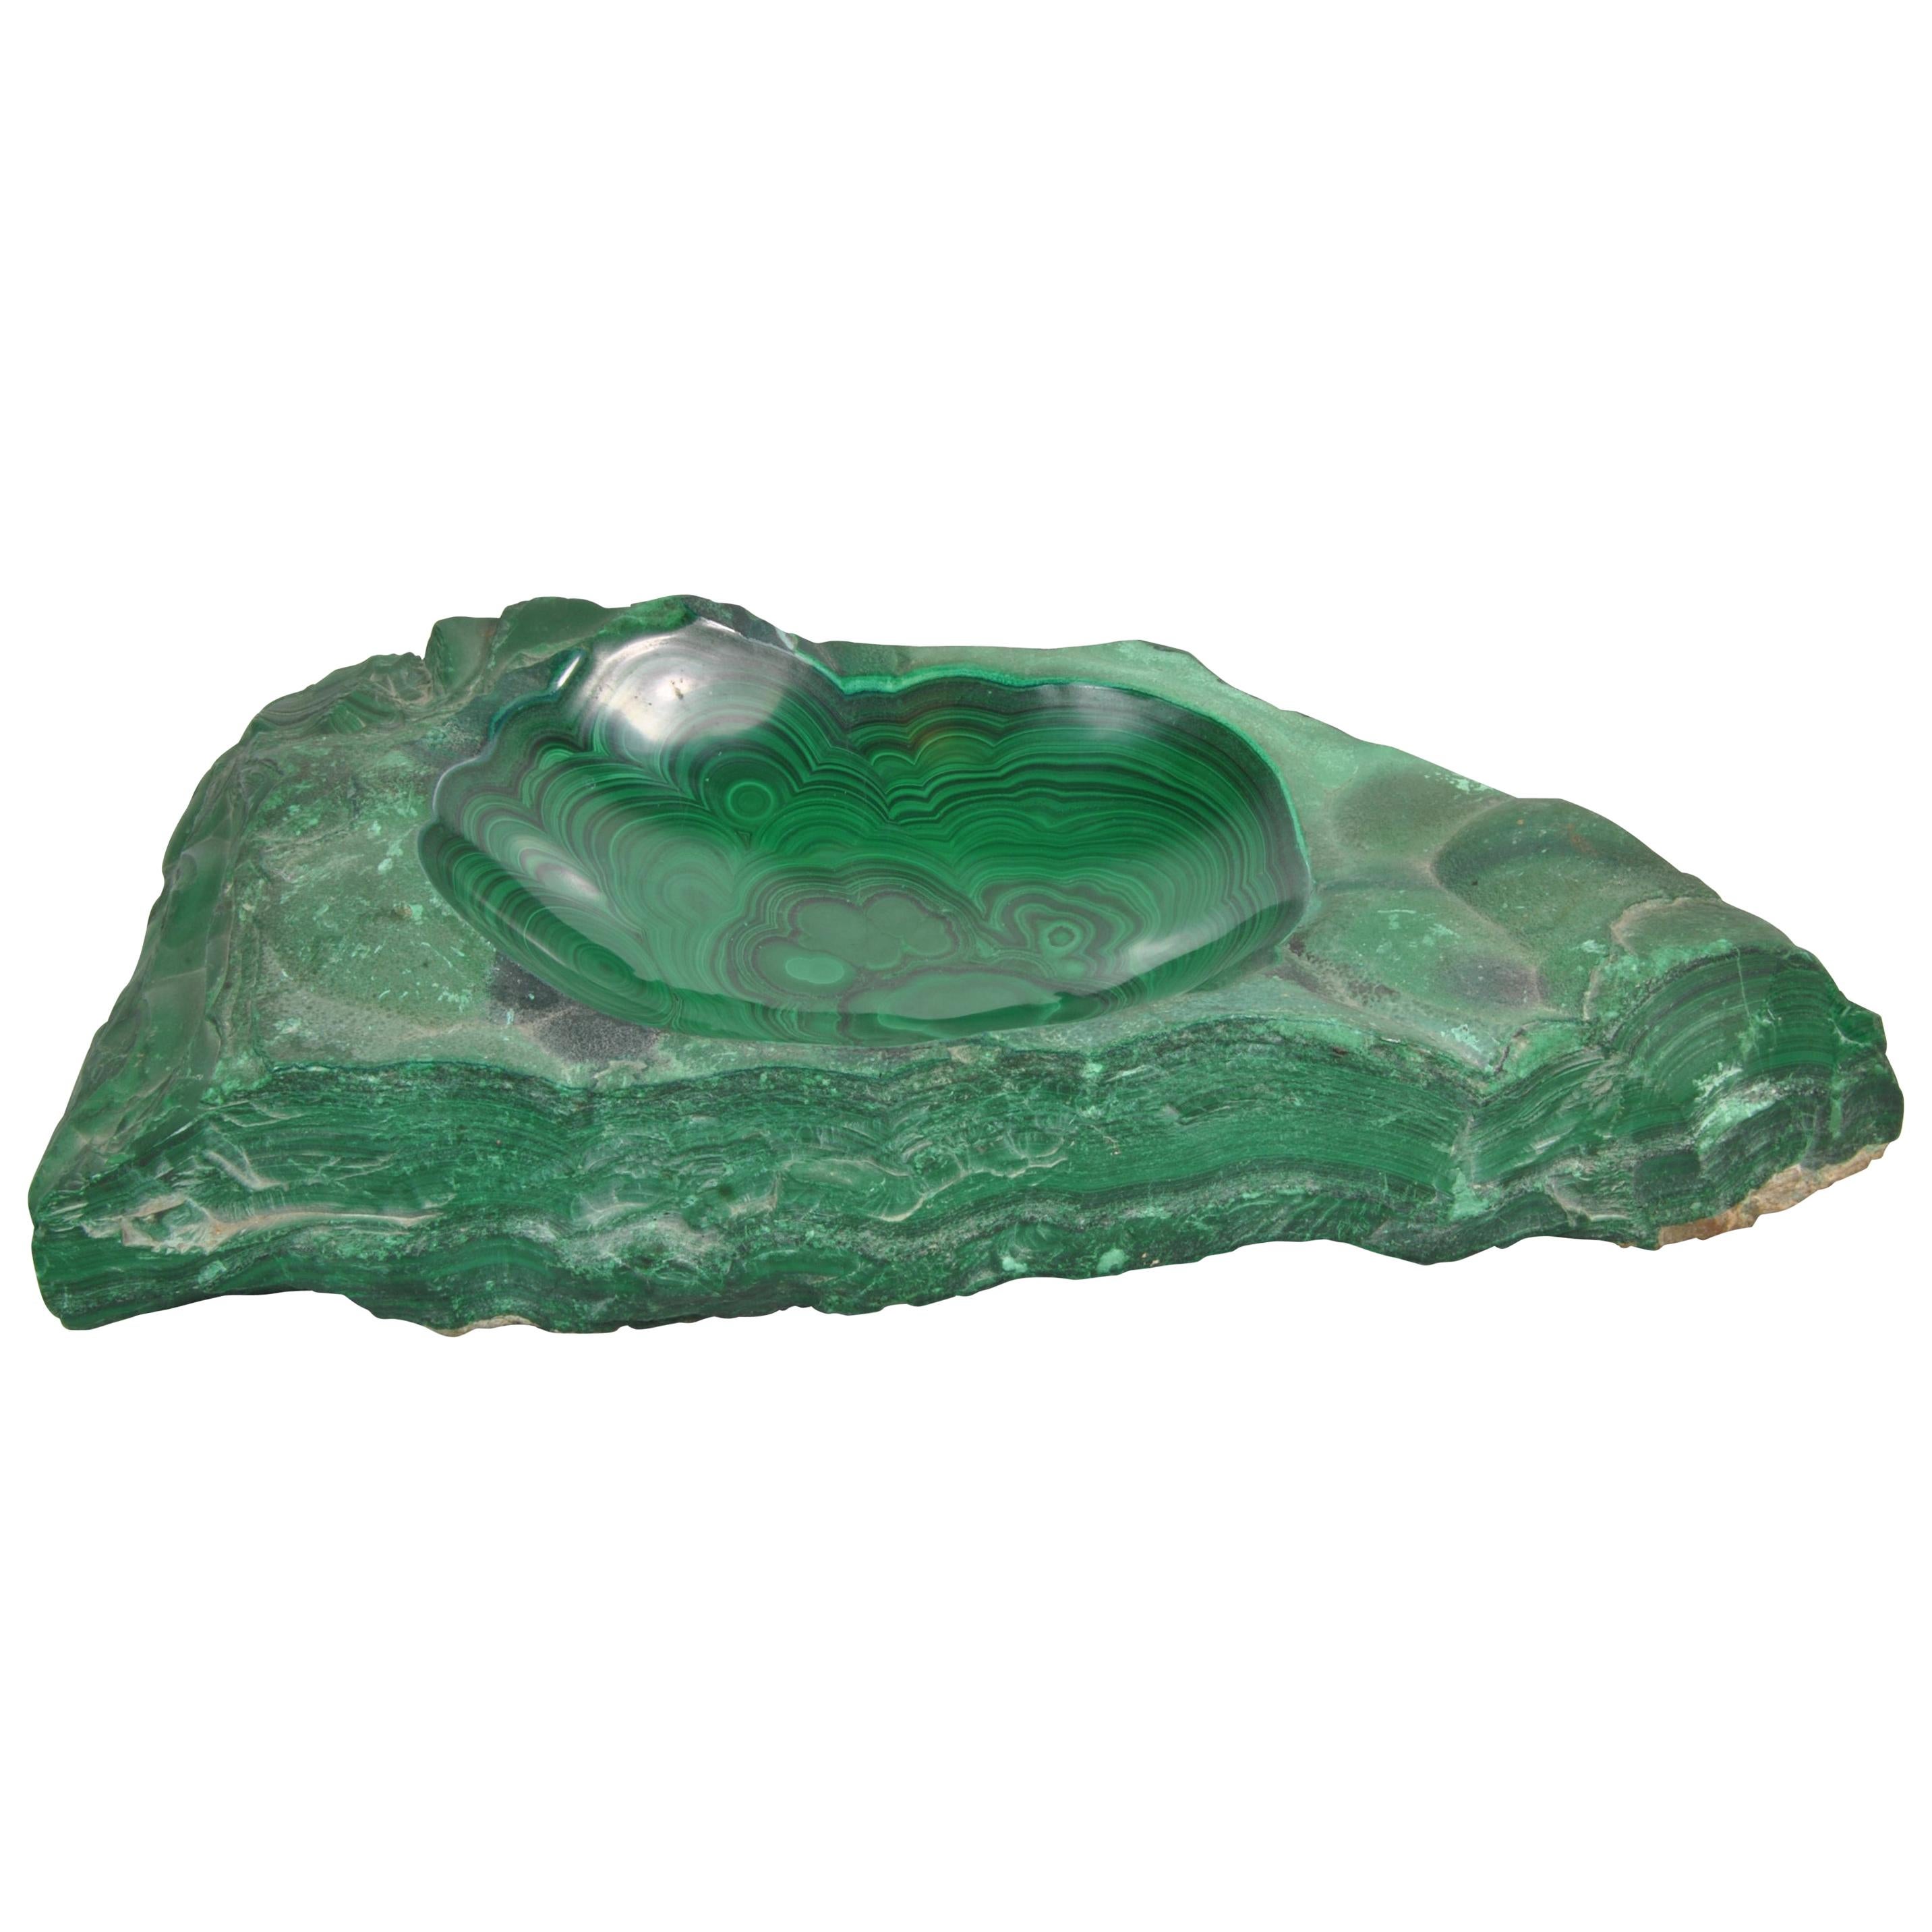 Awesome Bowl of All Natural Malachite Mineral Stone, Italy, 1950